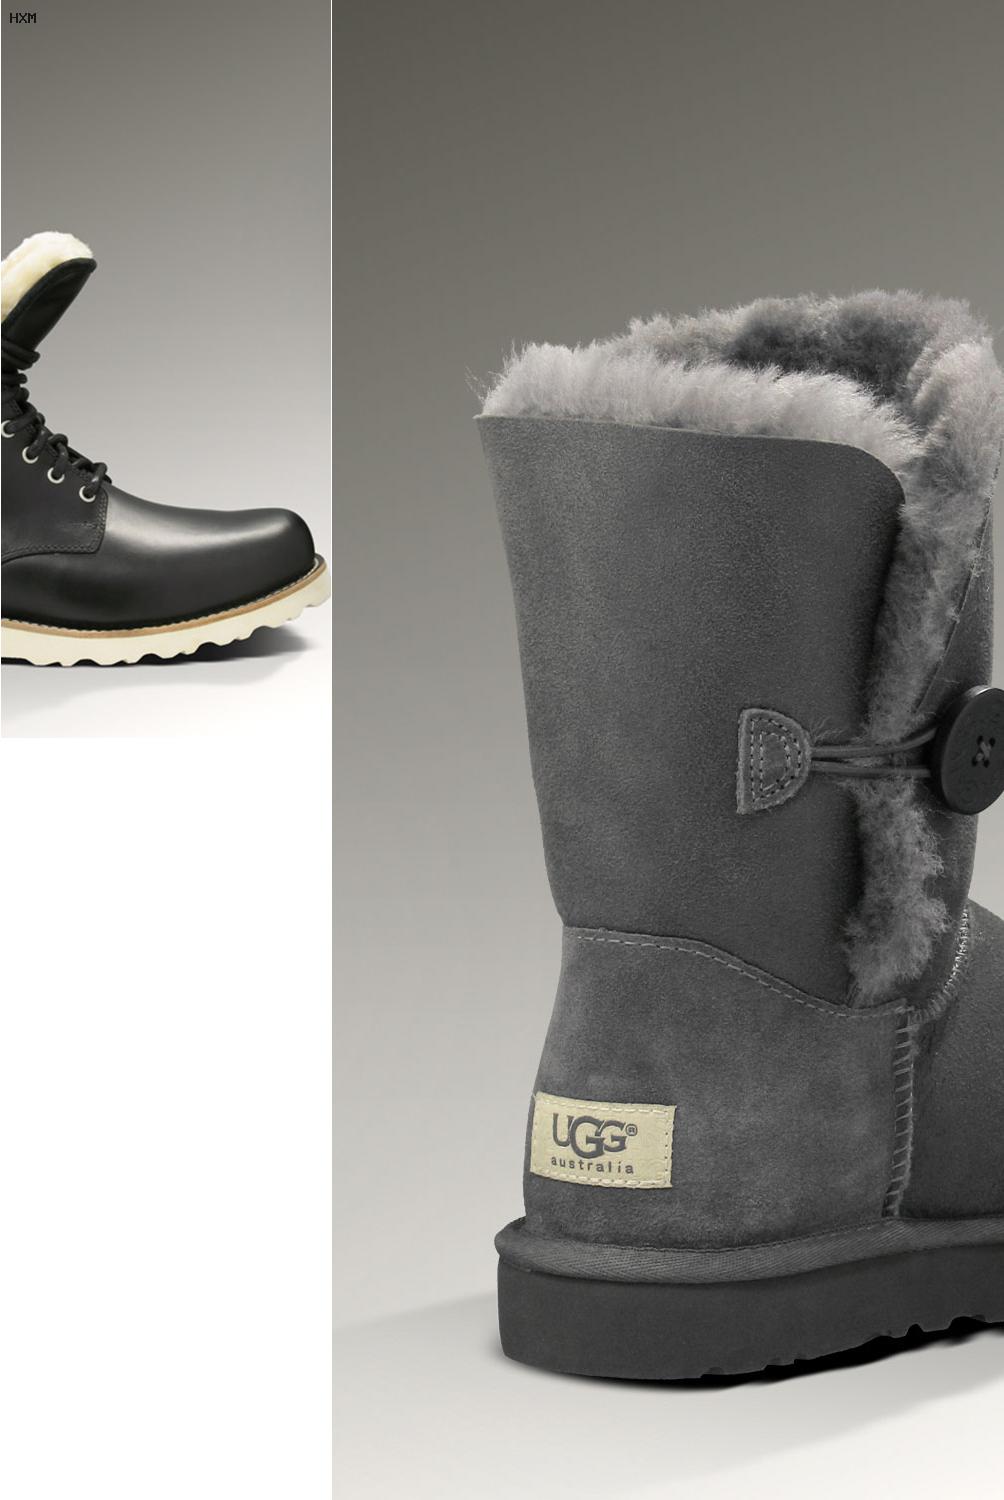 uggs outlet store ugg boots online